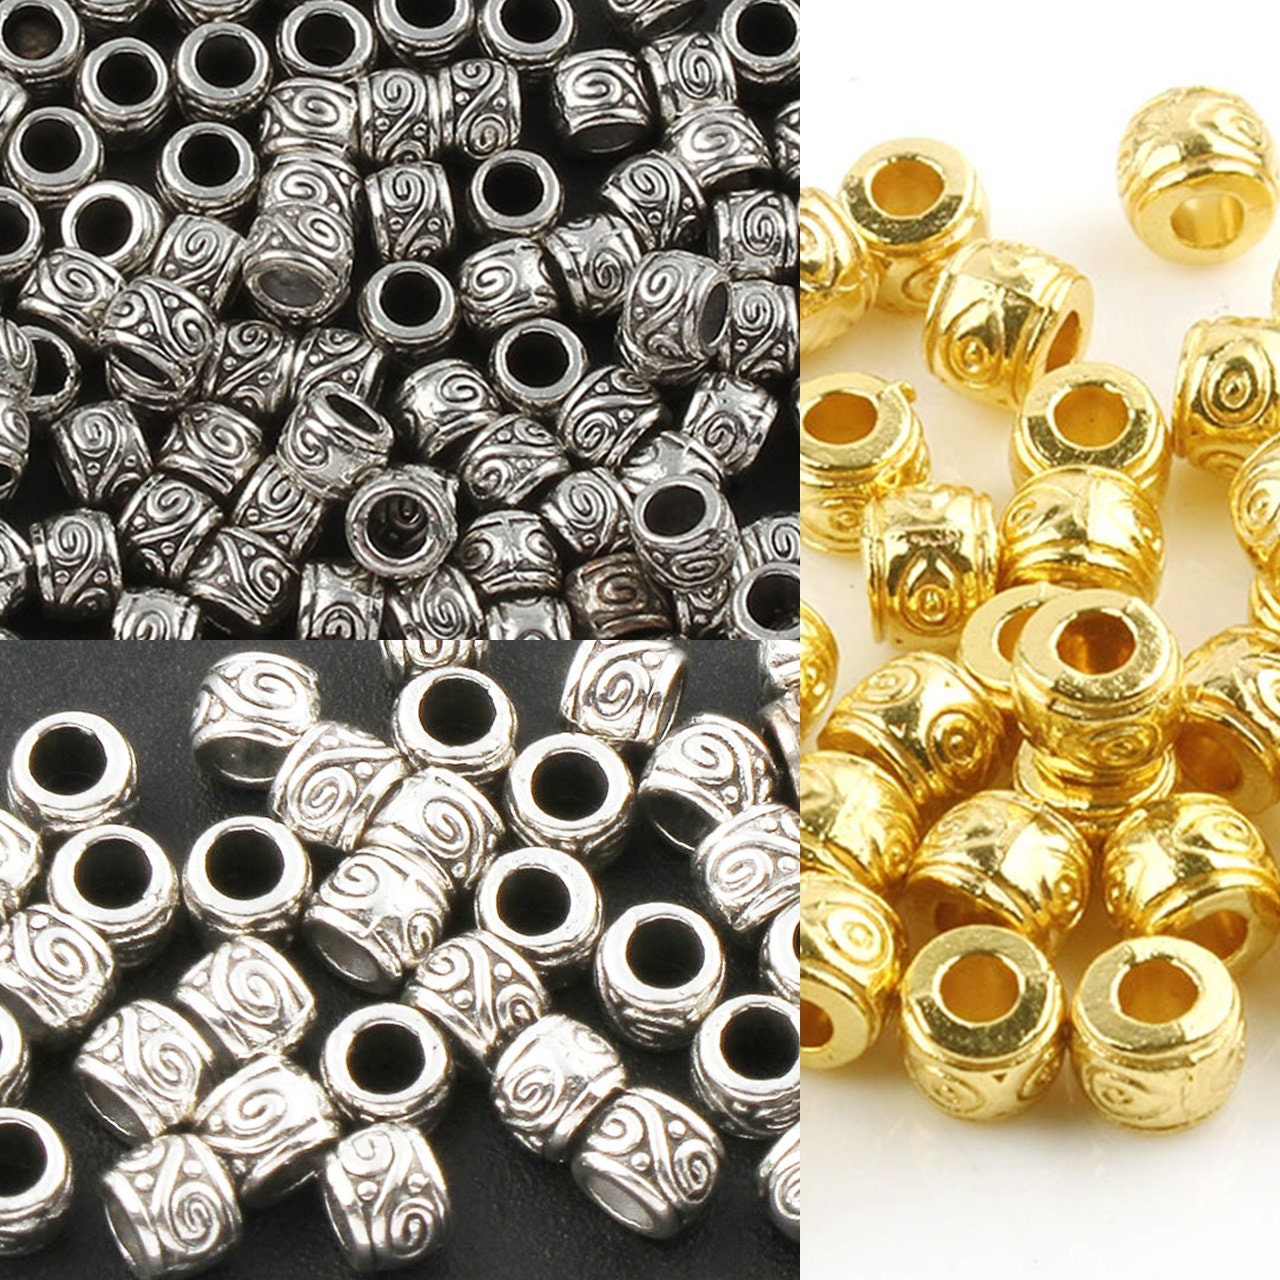 150pcs Metal Pearl Spacer Seed Beads 2.5/3mm Round Silver Tone